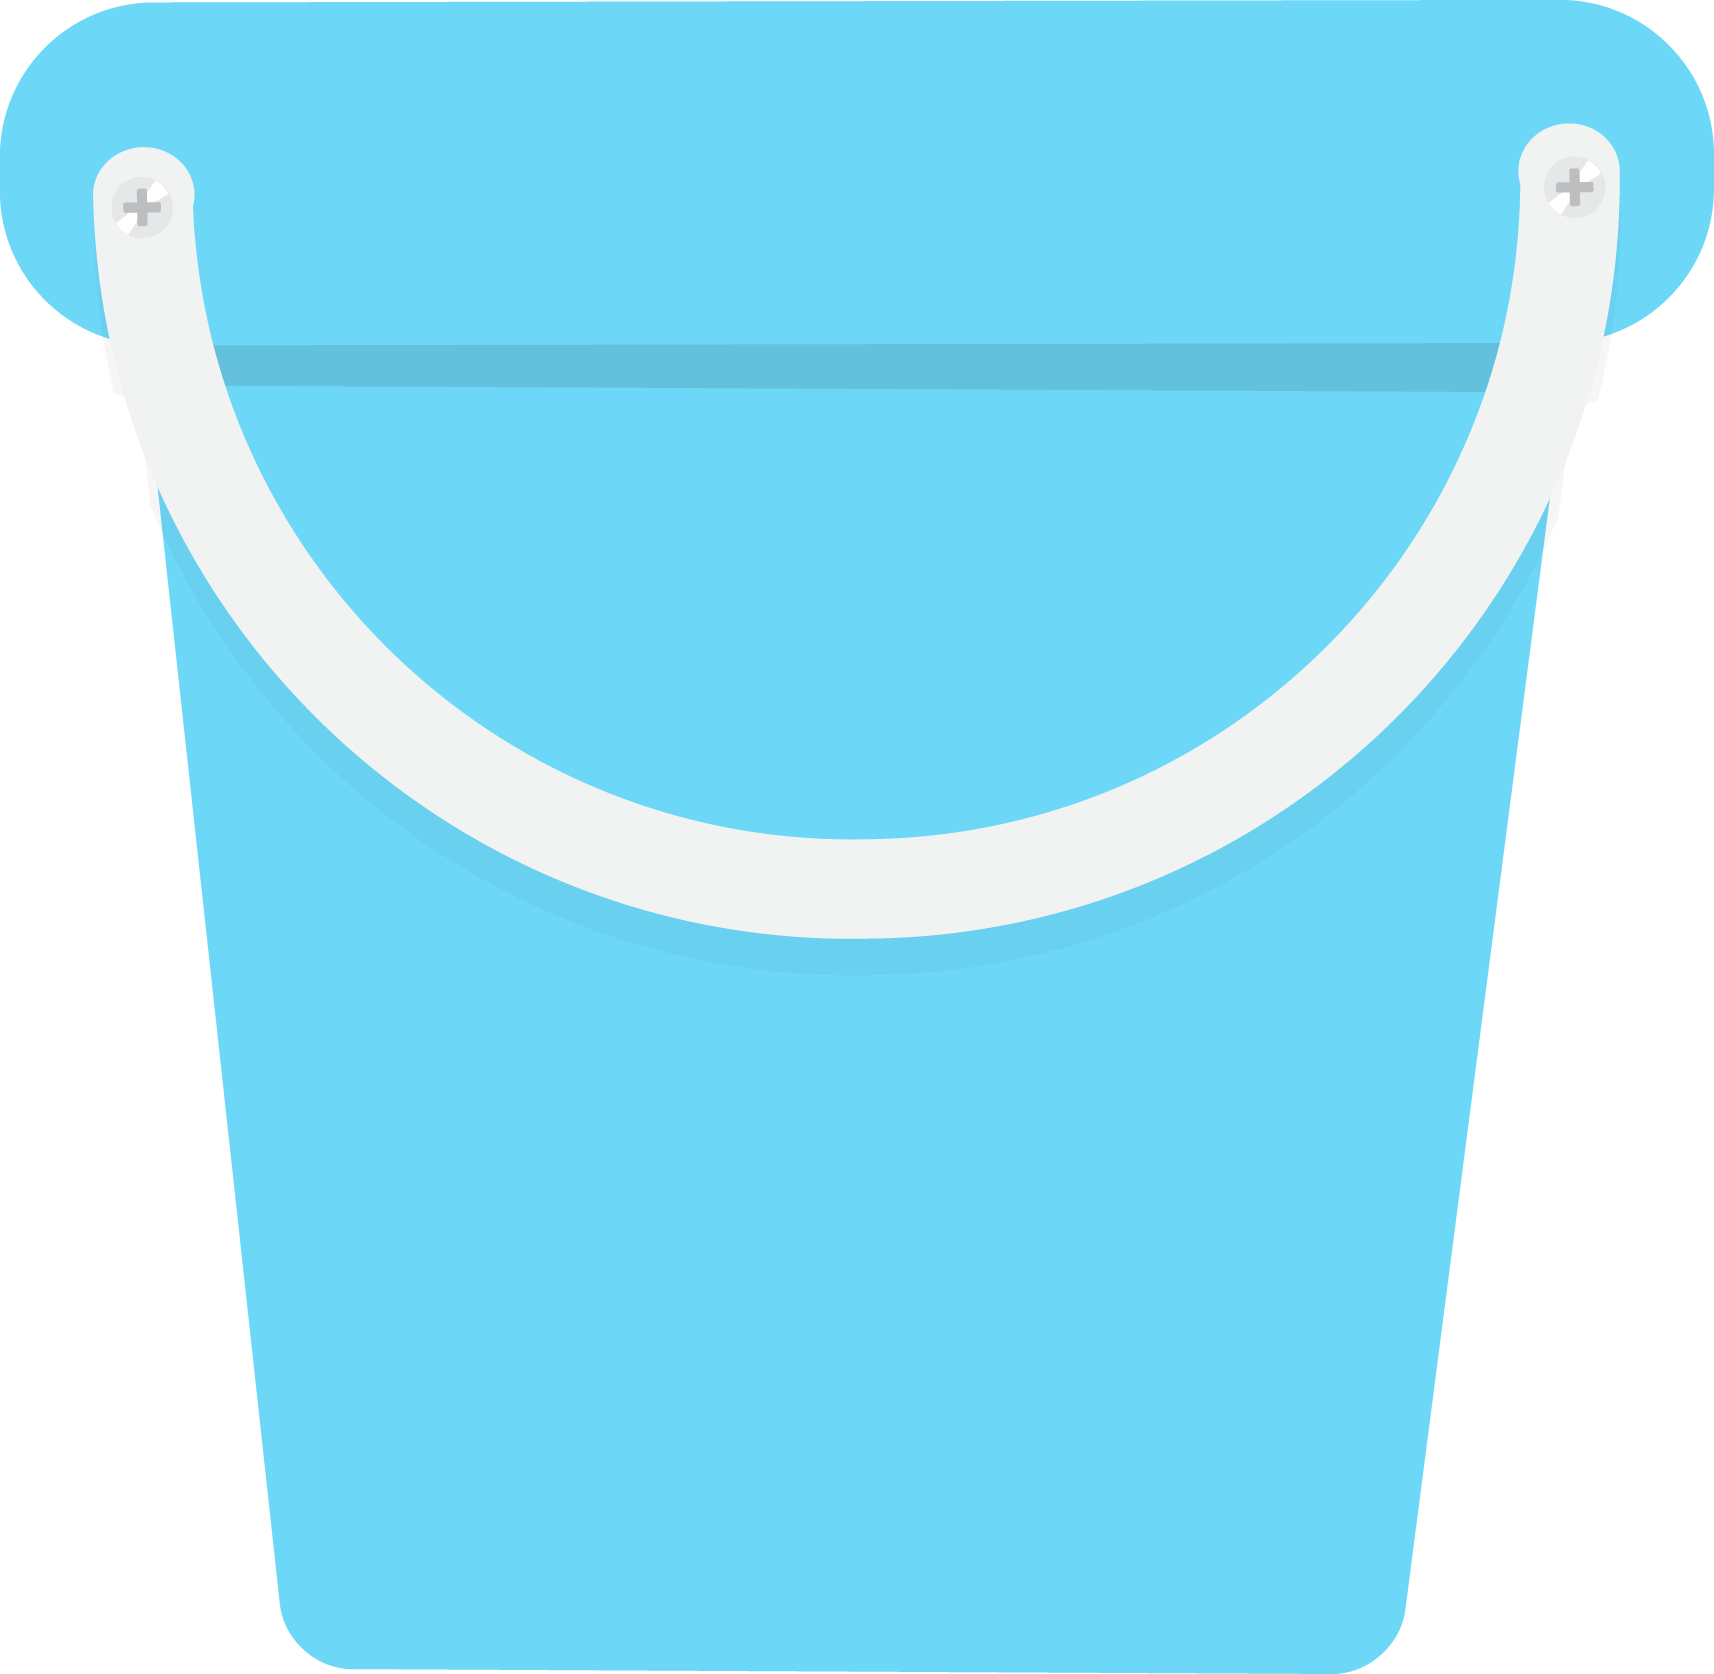 Photos Vector Bucket Download Free Image PNG Image